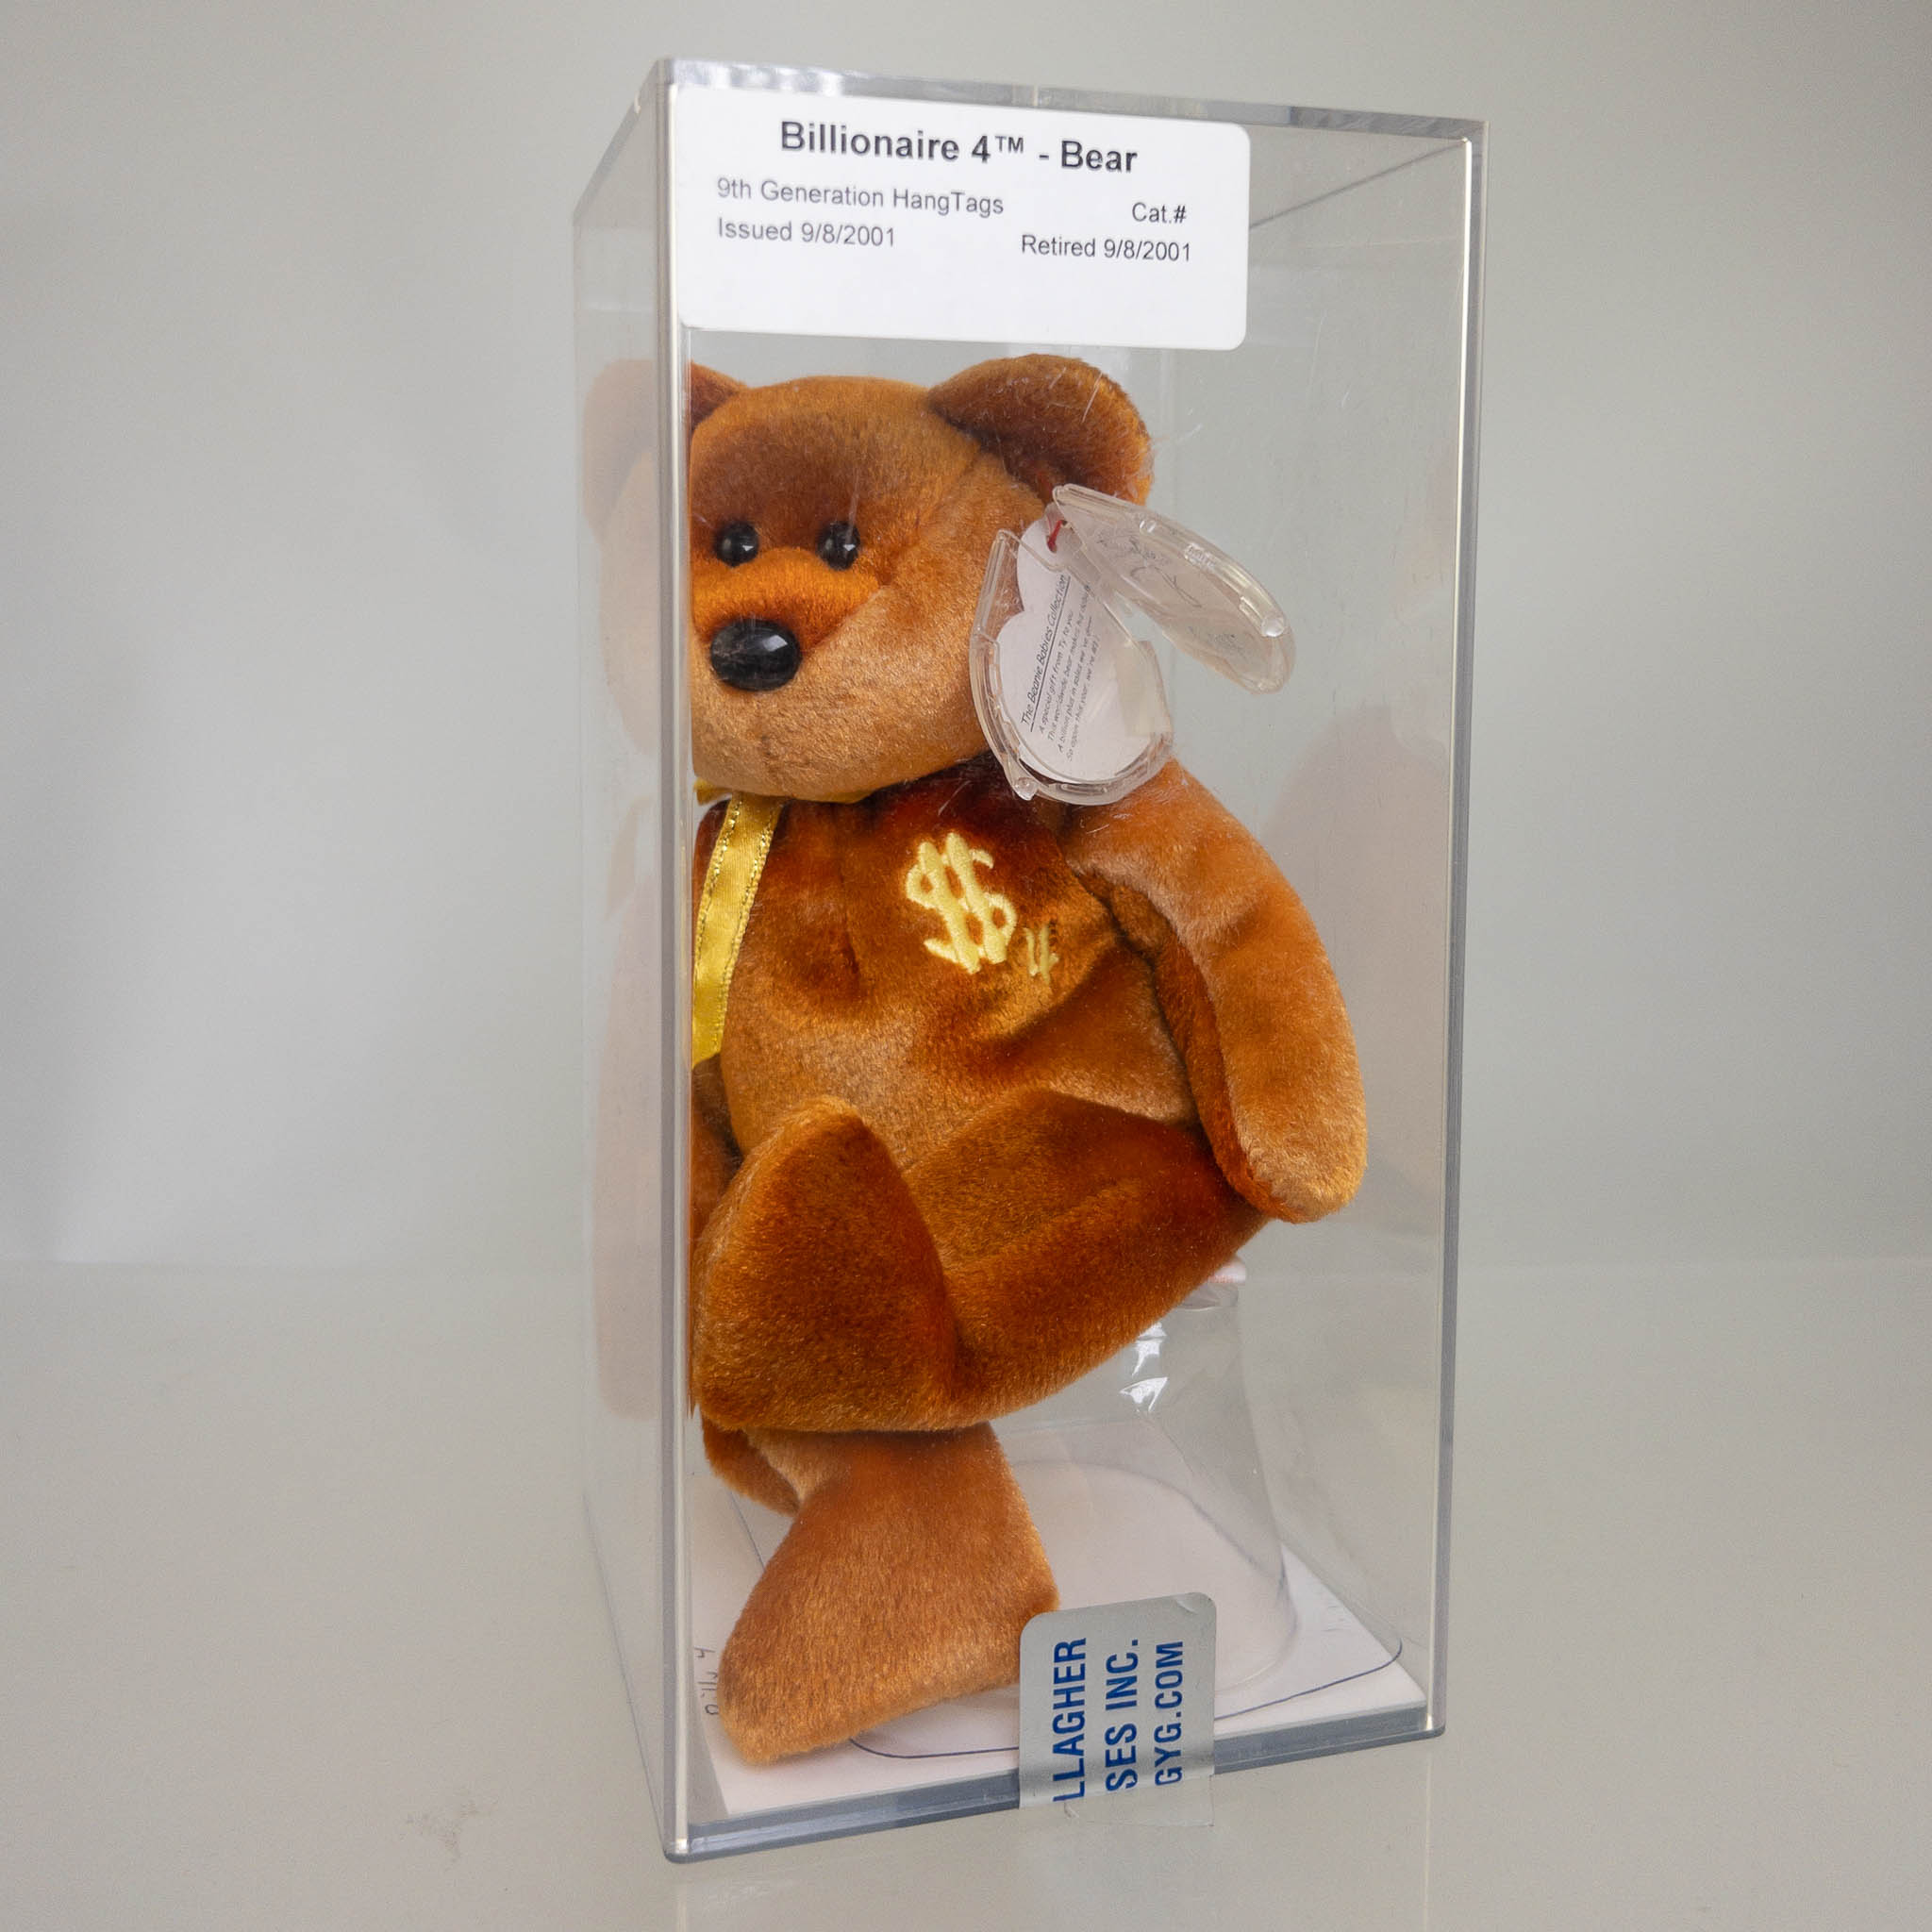 Authenticated TY Beanie Baby - BILLIONAIRE Bear #4 (Signed by TY Warner - #7 of 762)